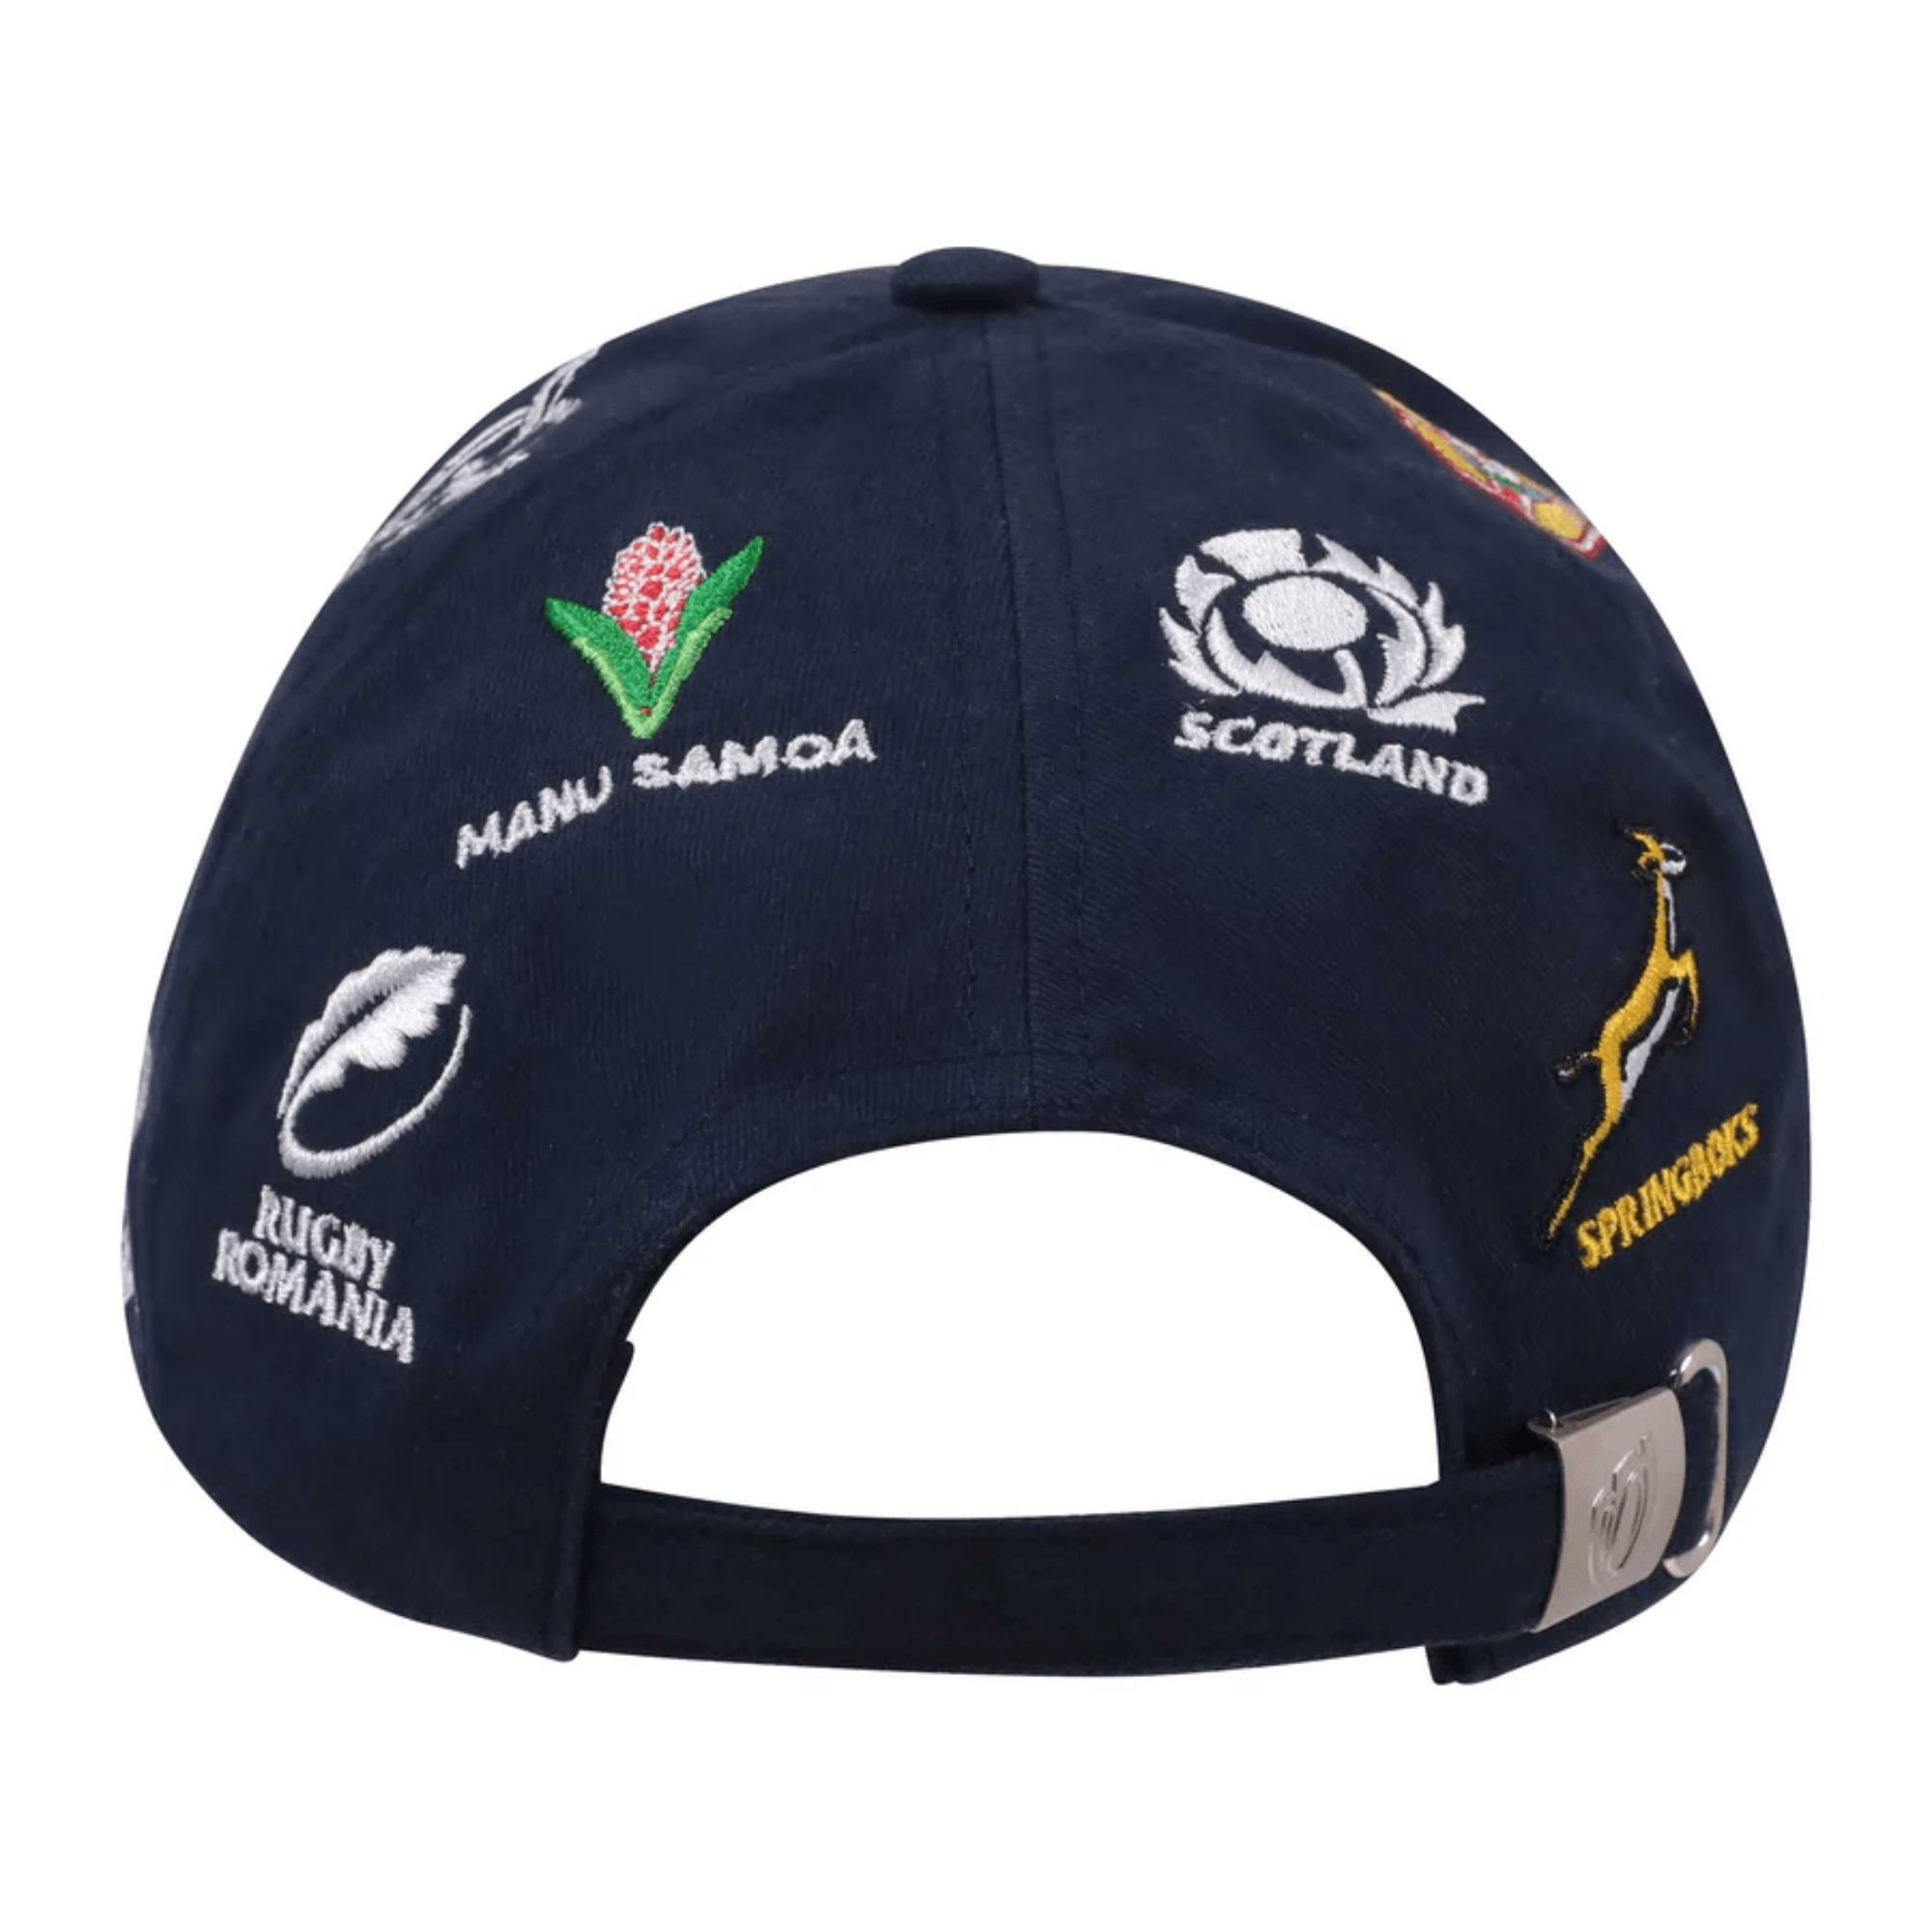 Rugby World Cup 23 20 Unions Cap World Rugby Shop